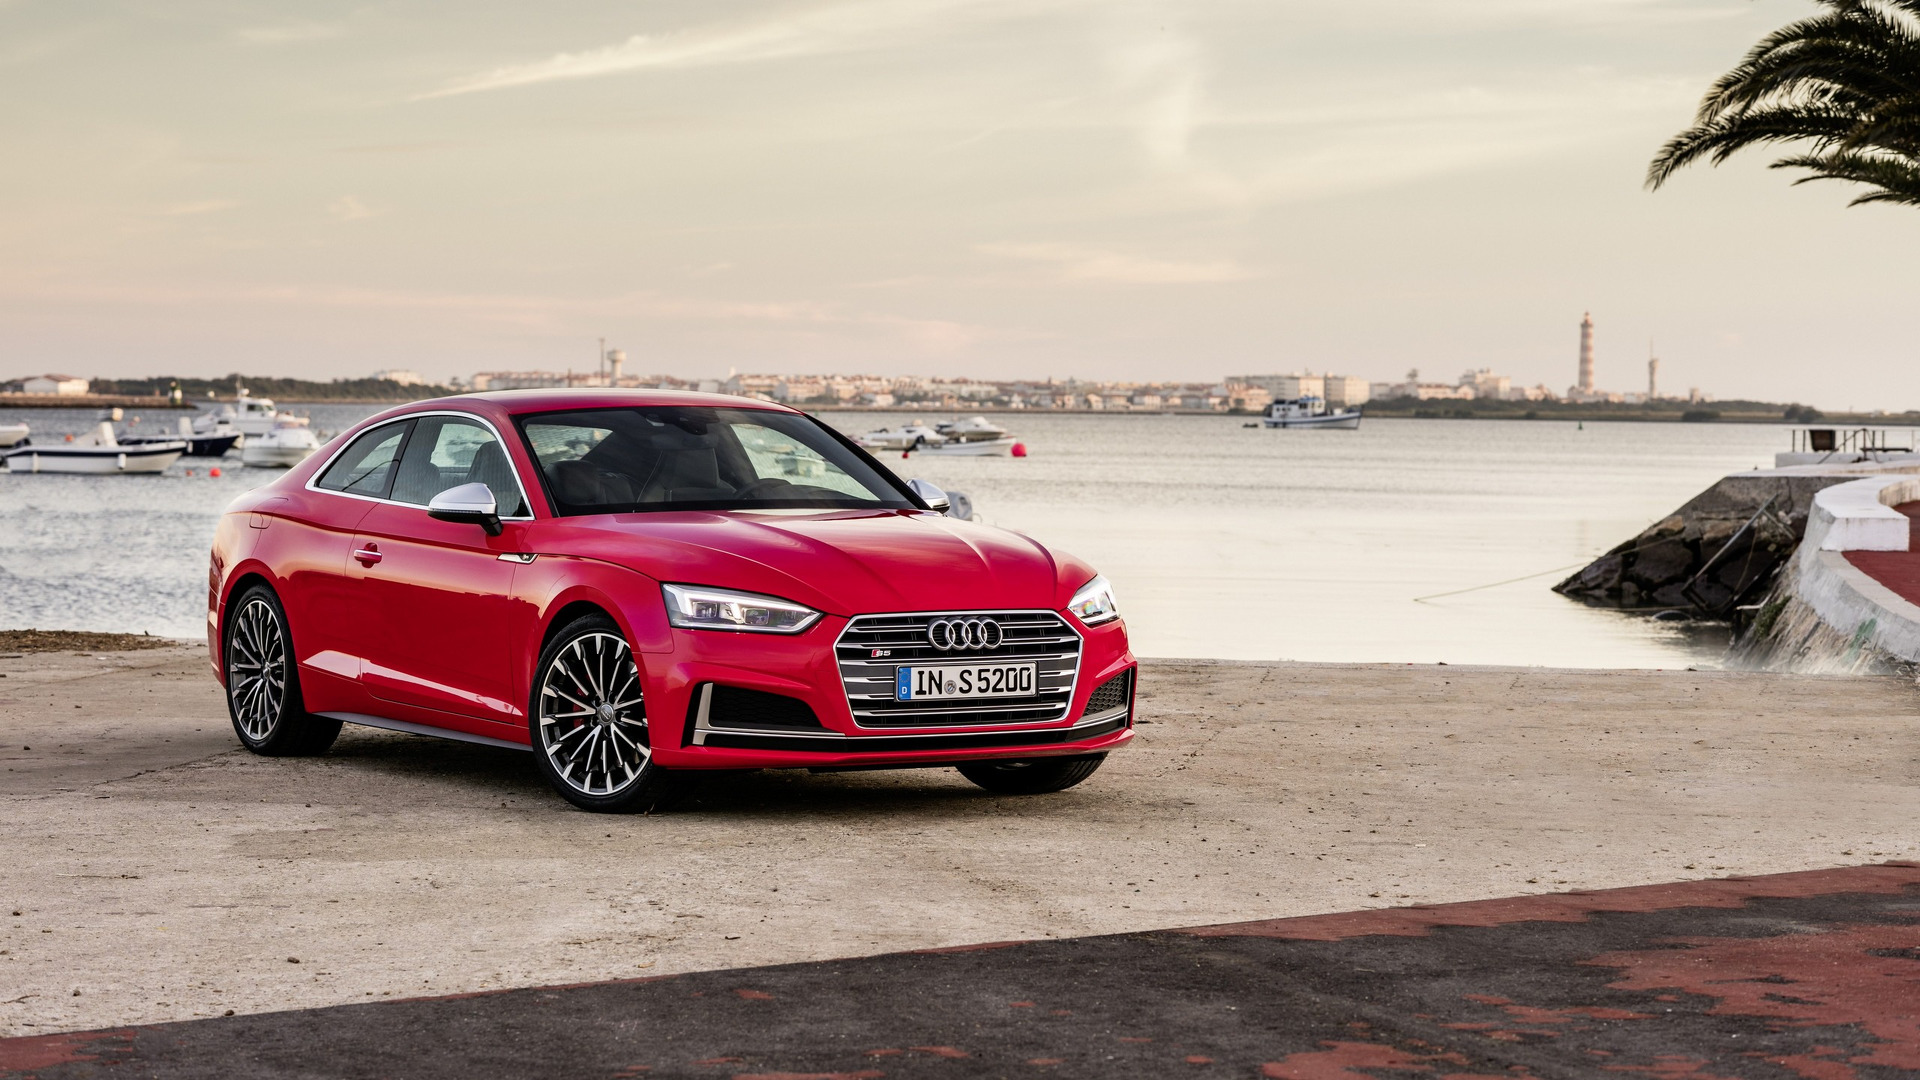 Rent A Audi A5 Coupe For An Hour In Dubai